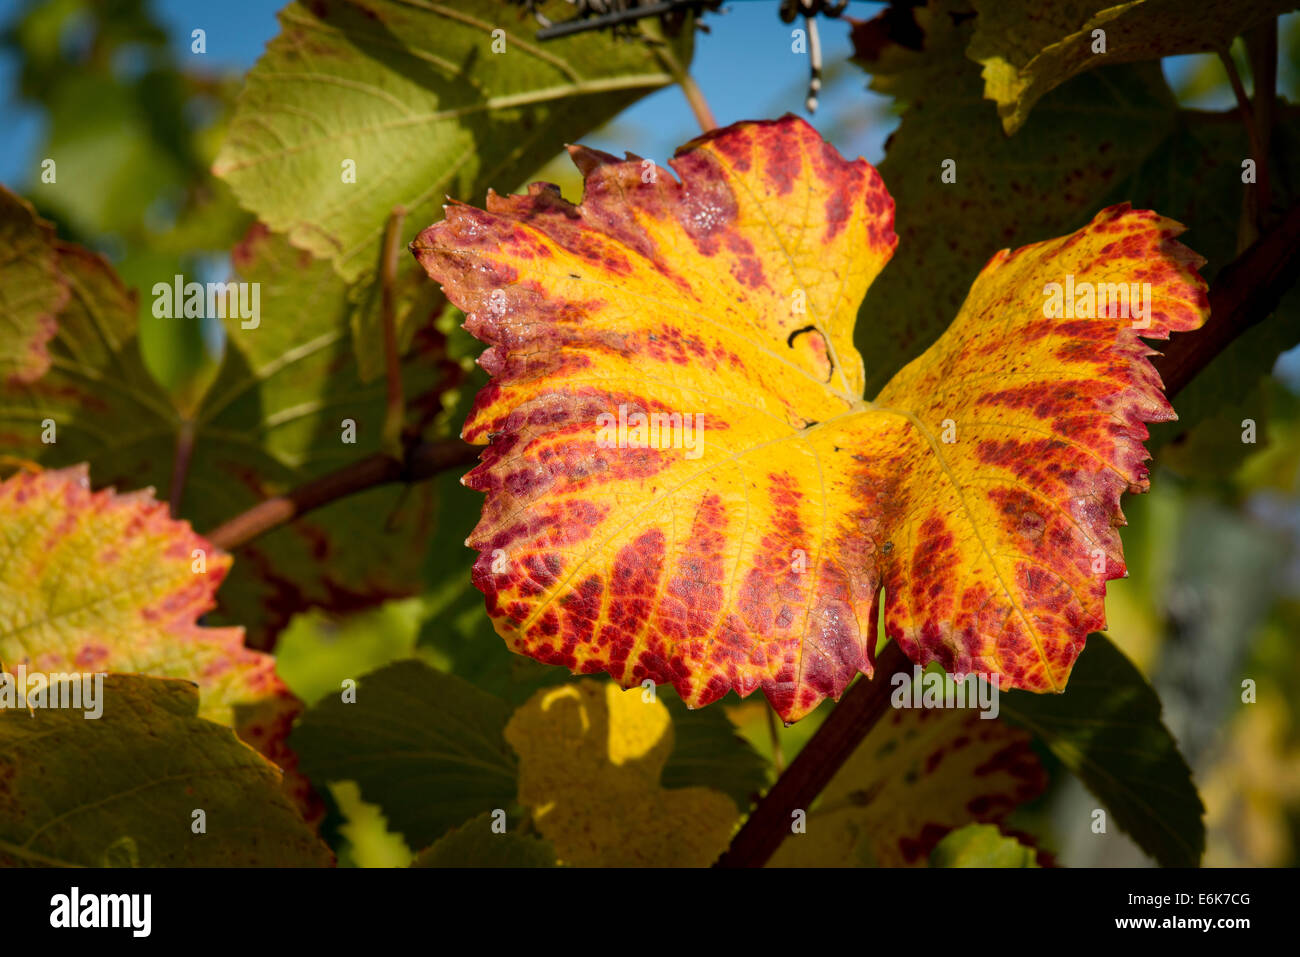 Vine leaf with autumn colours on the vine, Baden-Württemberg, Germany Stock Photo